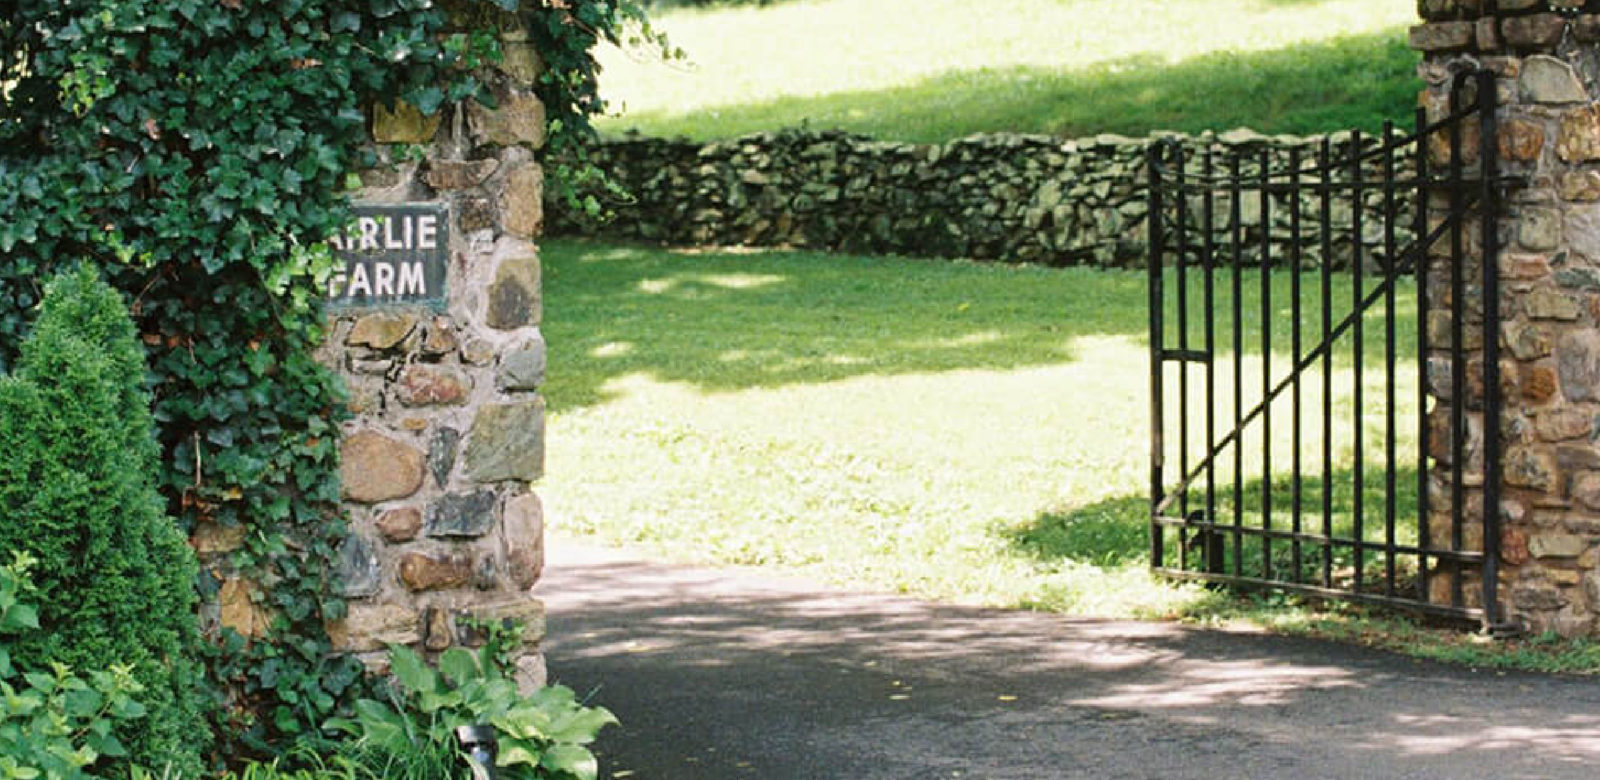 Airlie Farm entrance gate to property